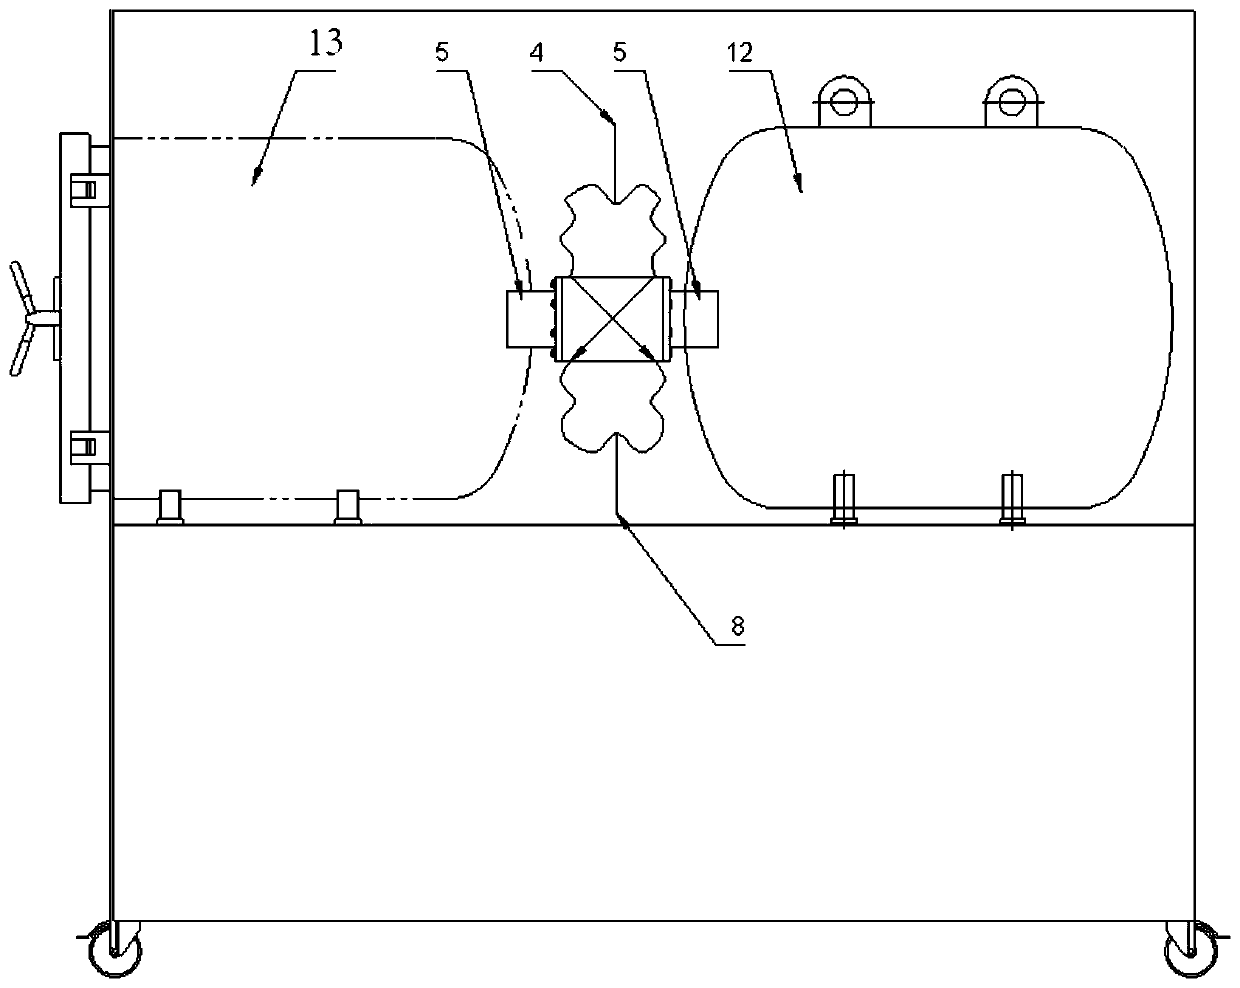 Gas detection device, system and method based on TDLAS technology